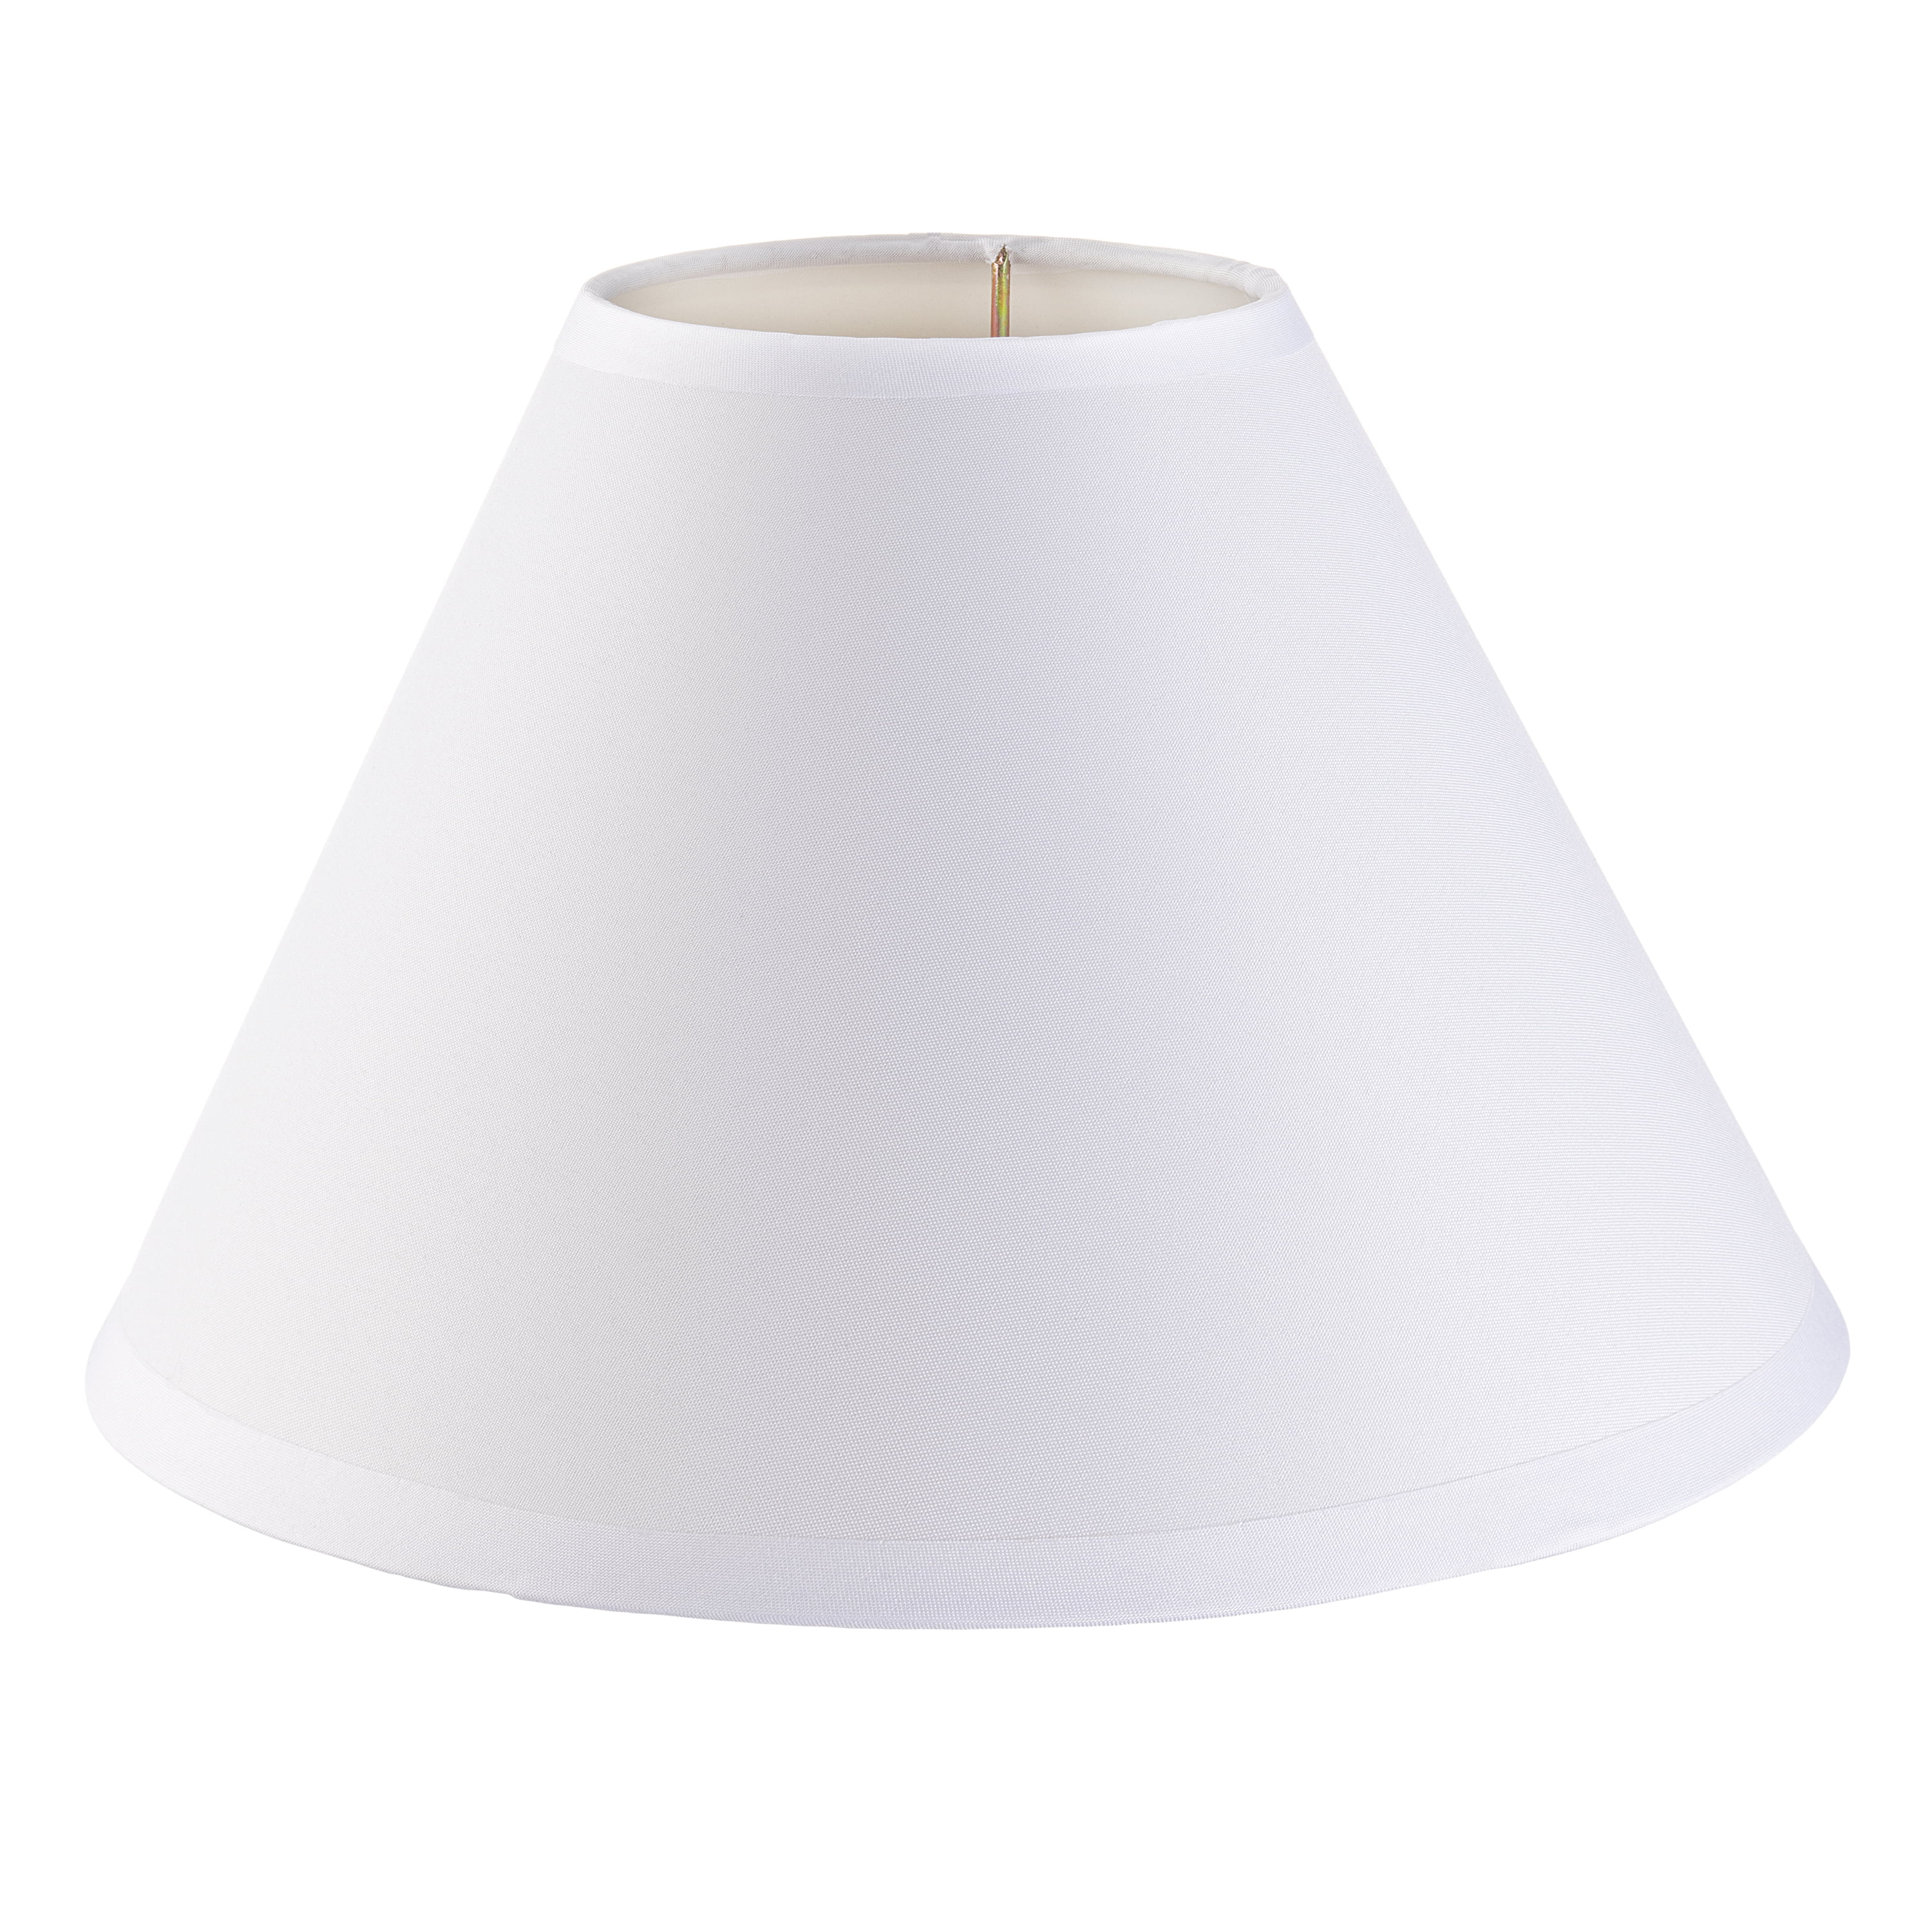 Cream with Swirl Leaf Pattern Darice Lampshade 5 inches